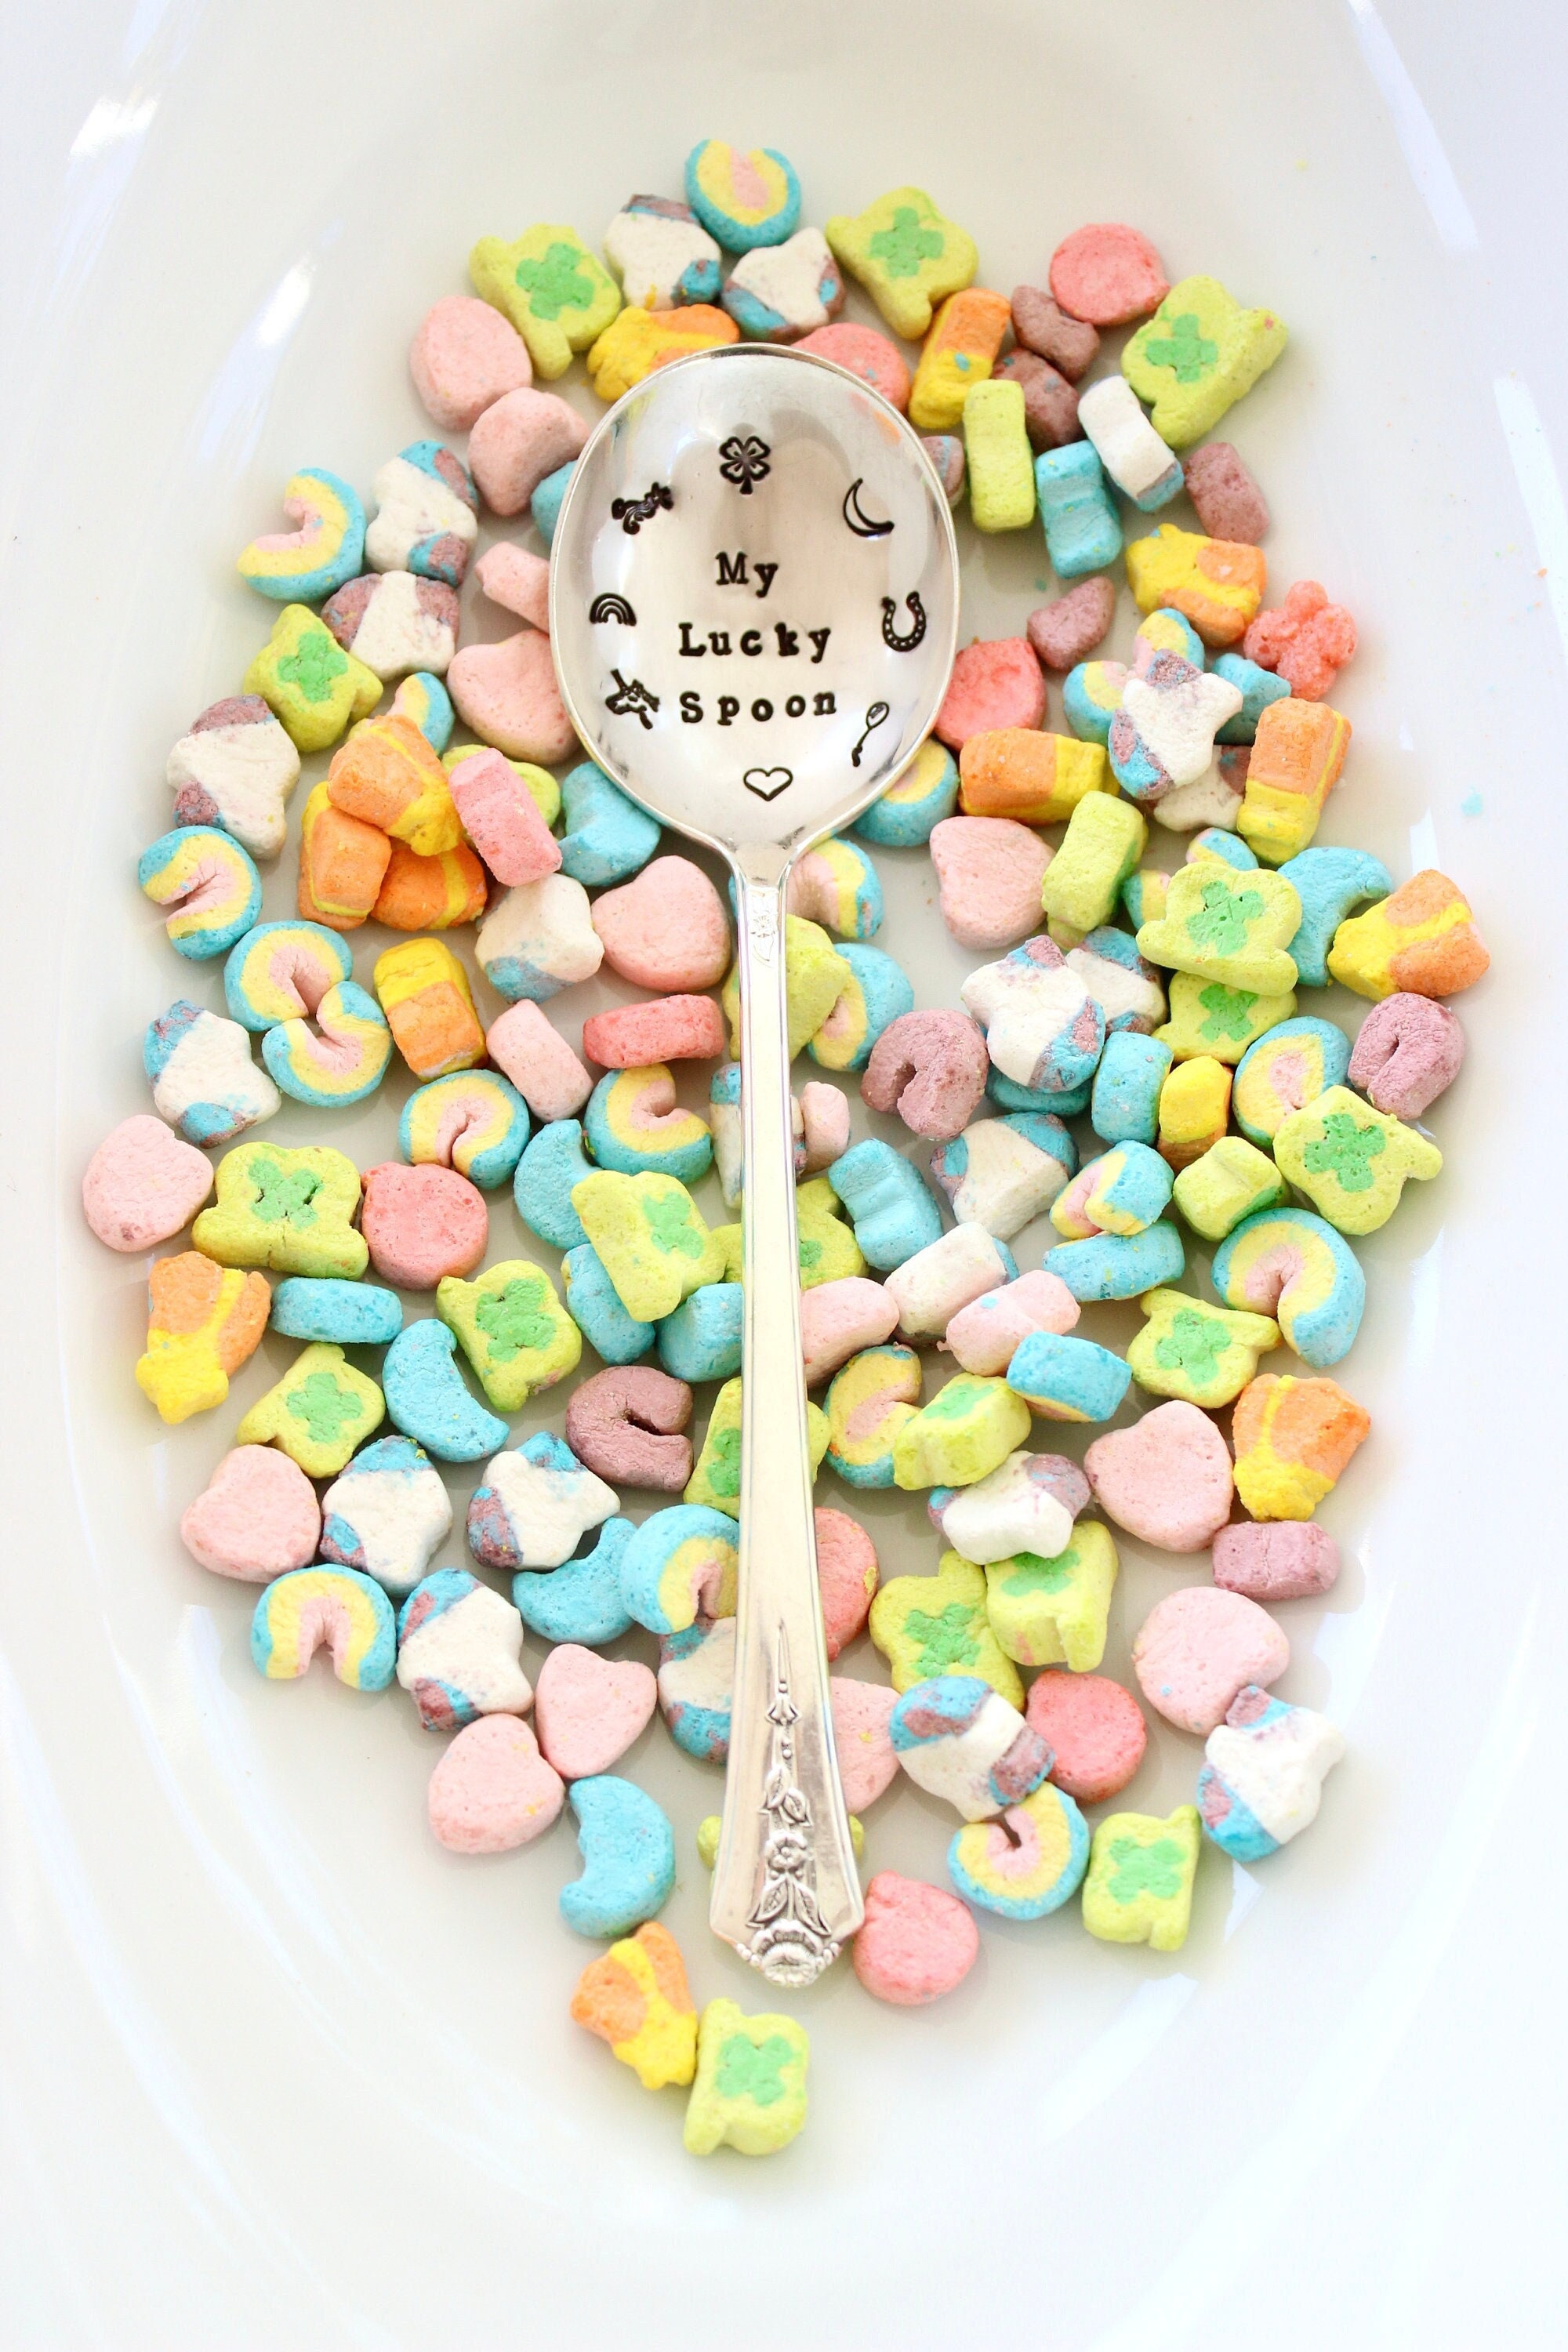 Lucky Charms, Lucky Charms Marshmallow Cereal, Fake Lucky Charms, St.  Patricks Day Lucky Charms Marshmallows, Lucky Charms for Tier Tray 